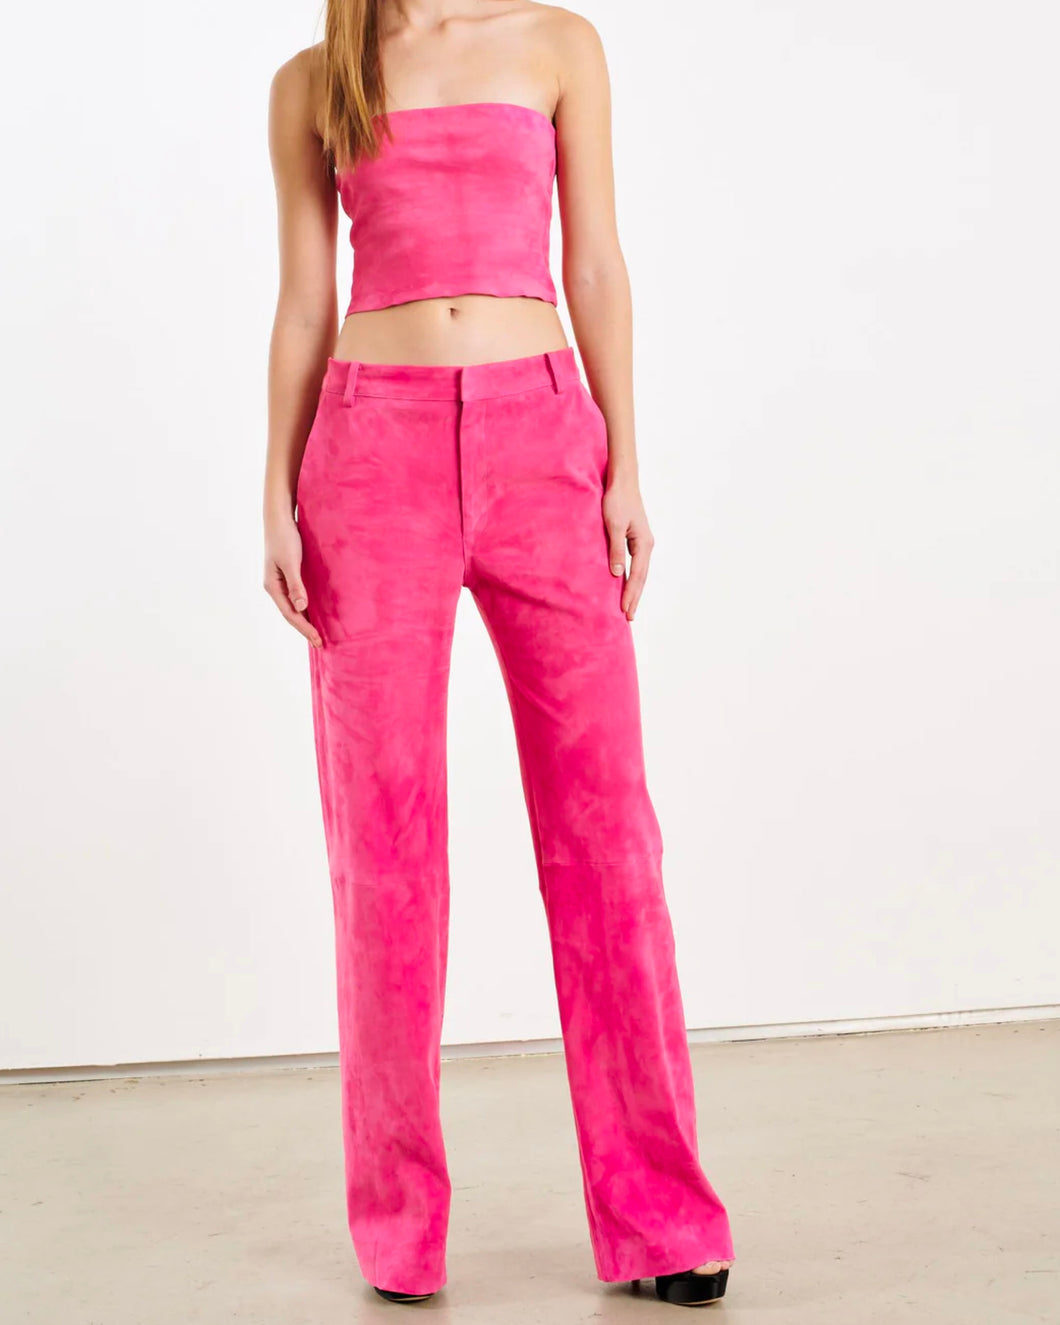 BAGGY LOWRISE SUEDE TROUSER HOT PINK